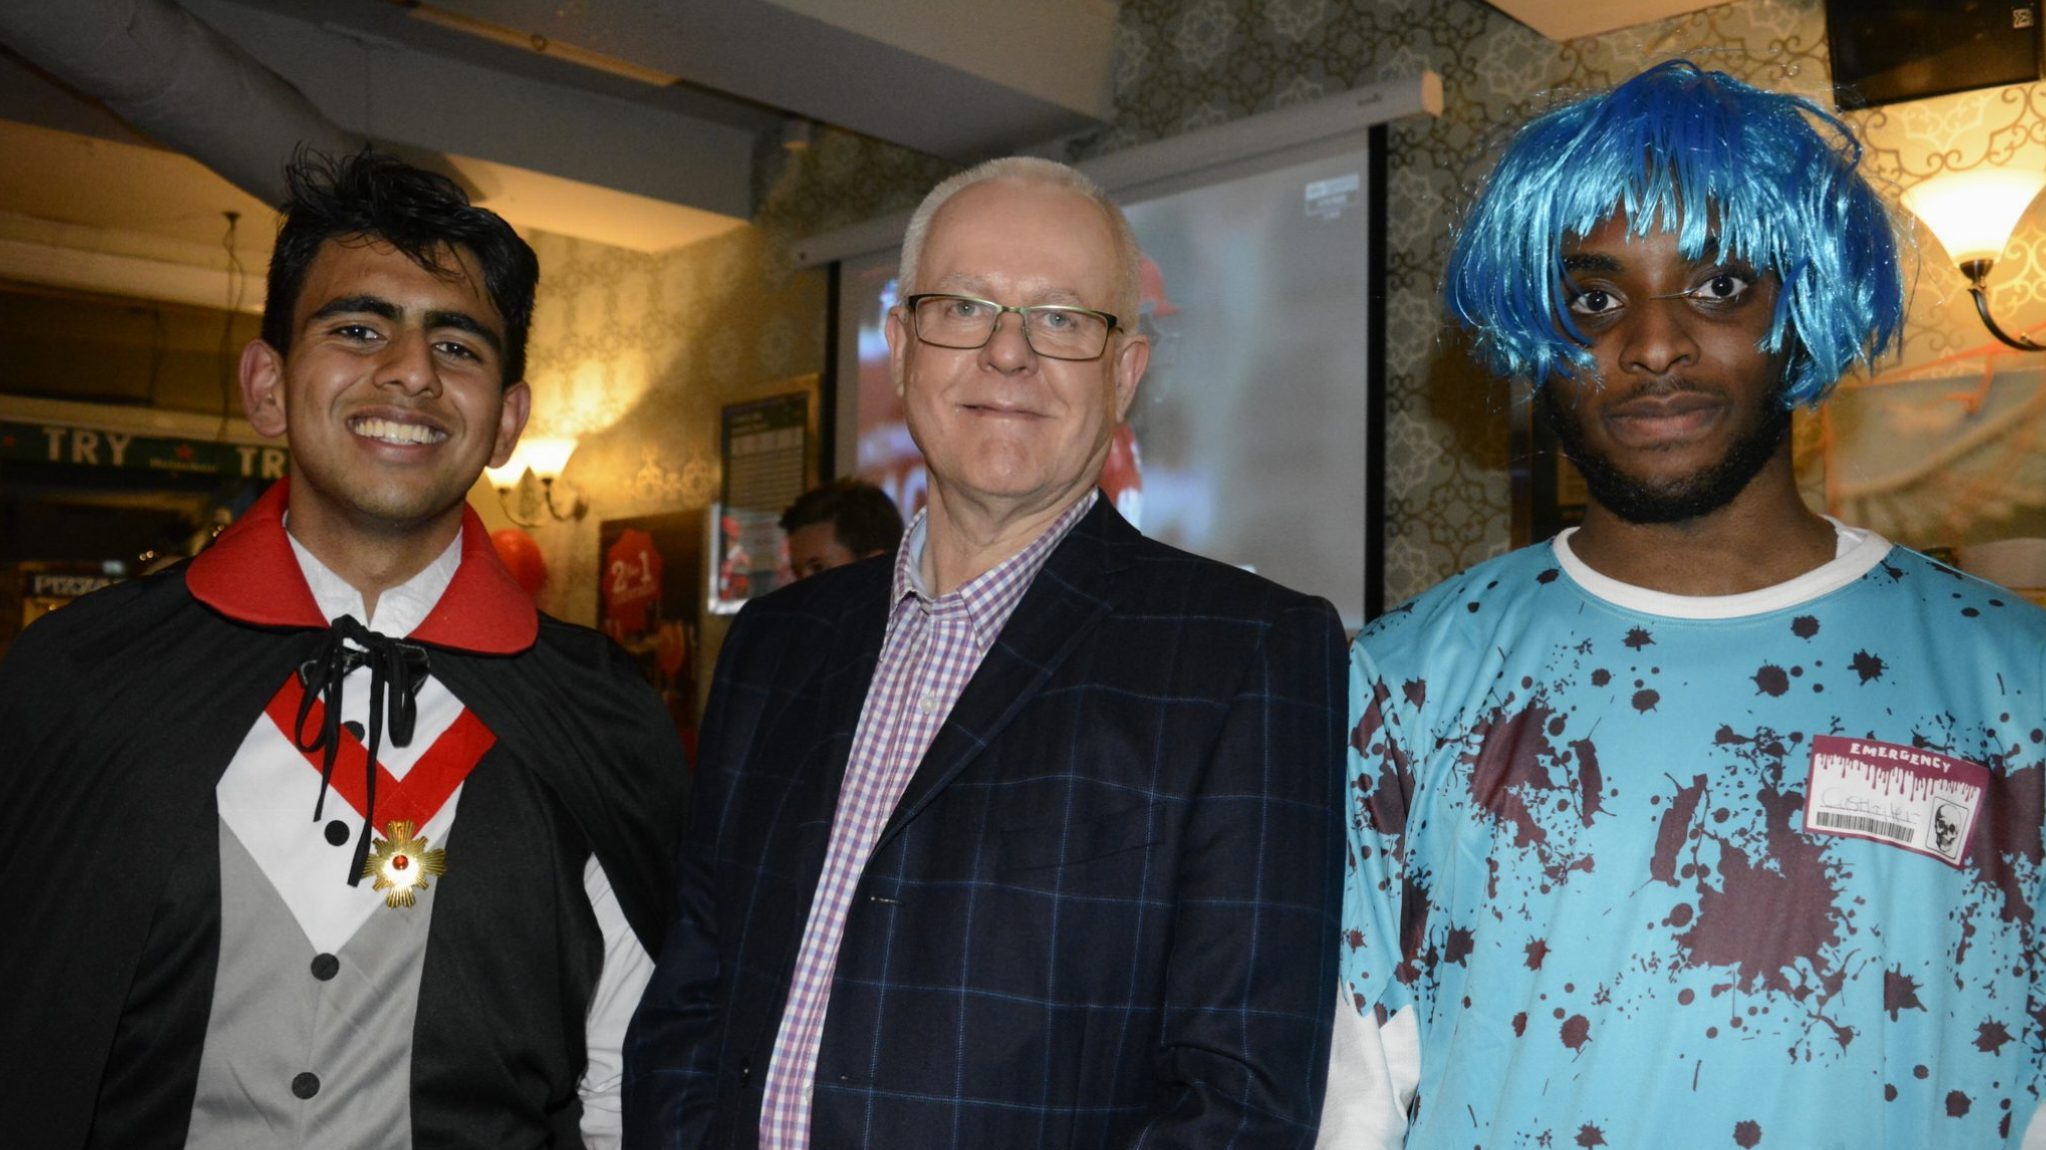 Biomedical and Save a Baby’s Life societies collab in joint Halloween party for retiring lecturer